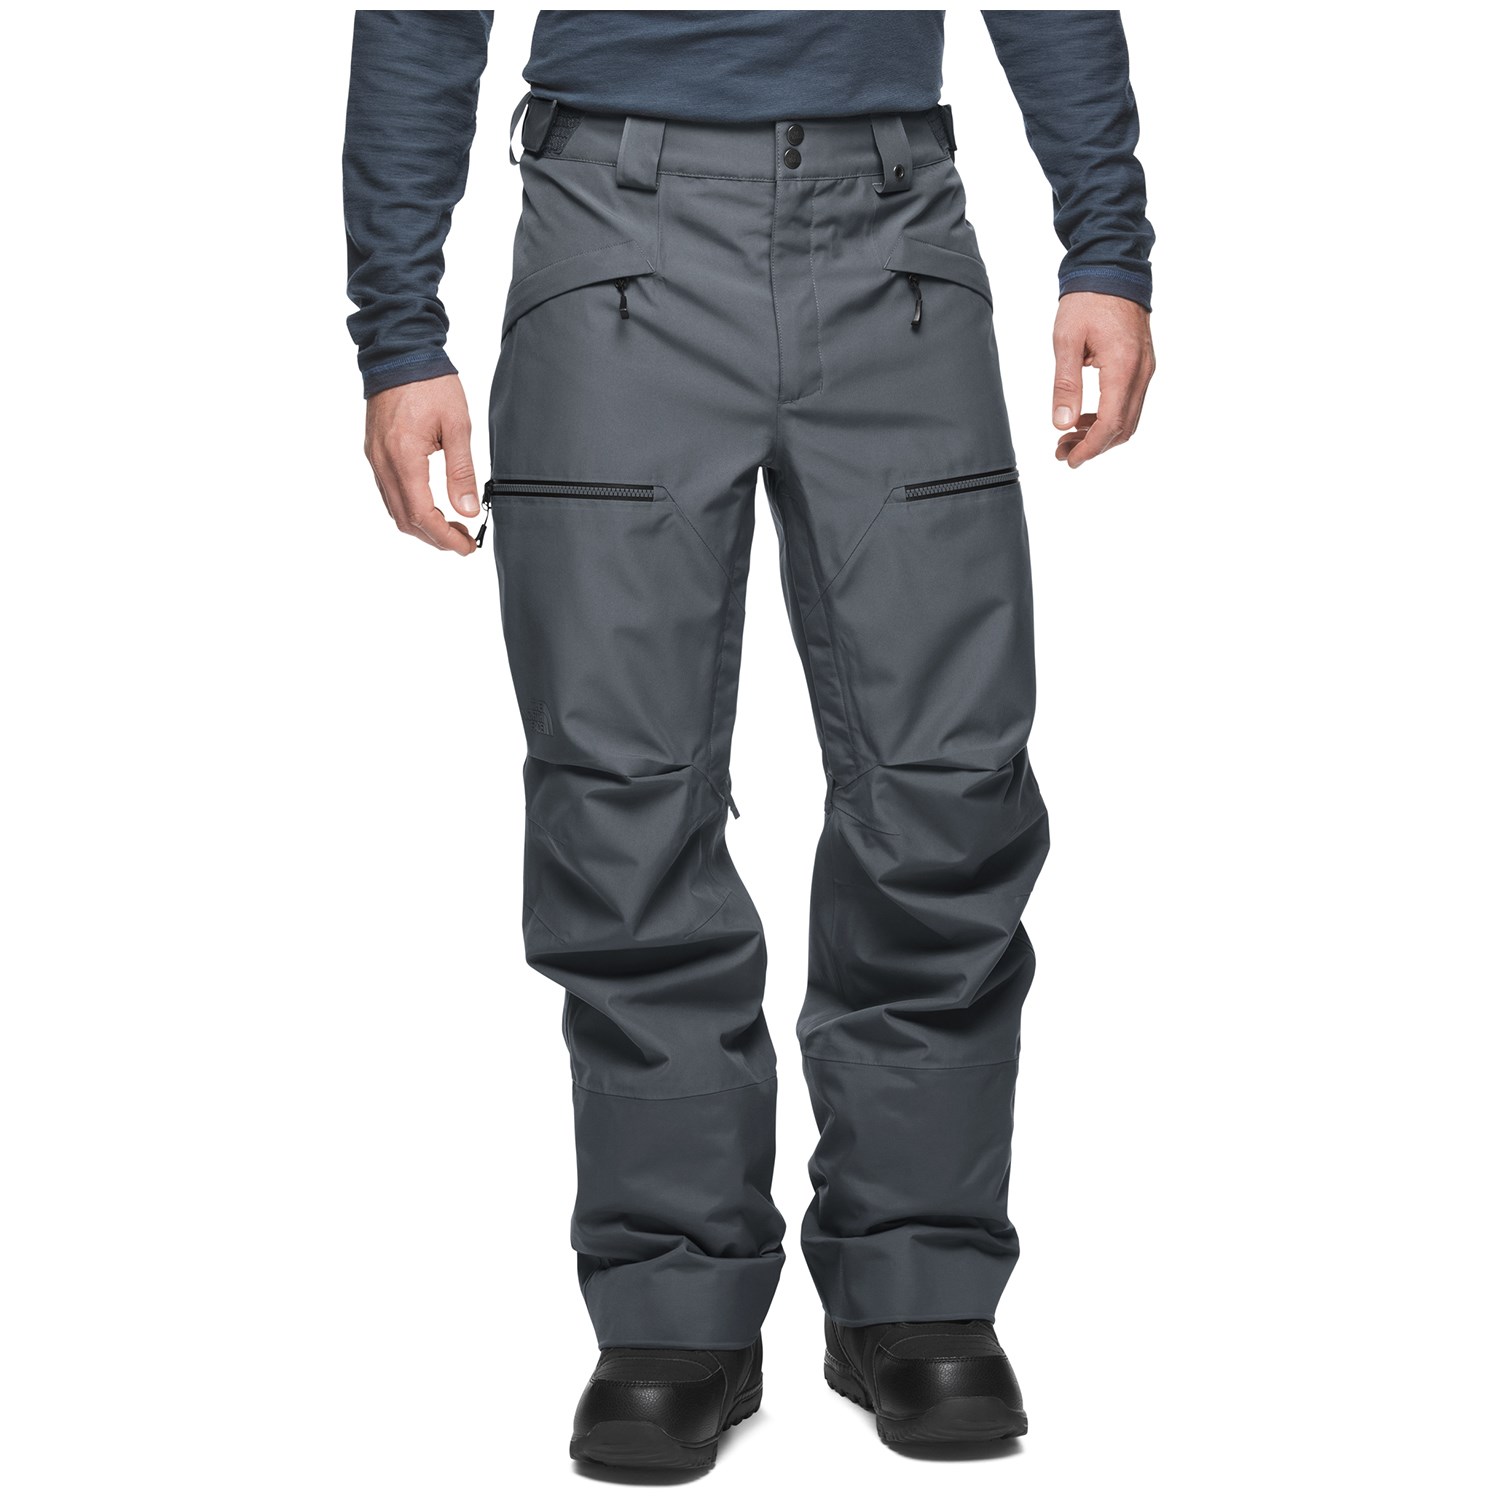 north face powder guide pants review